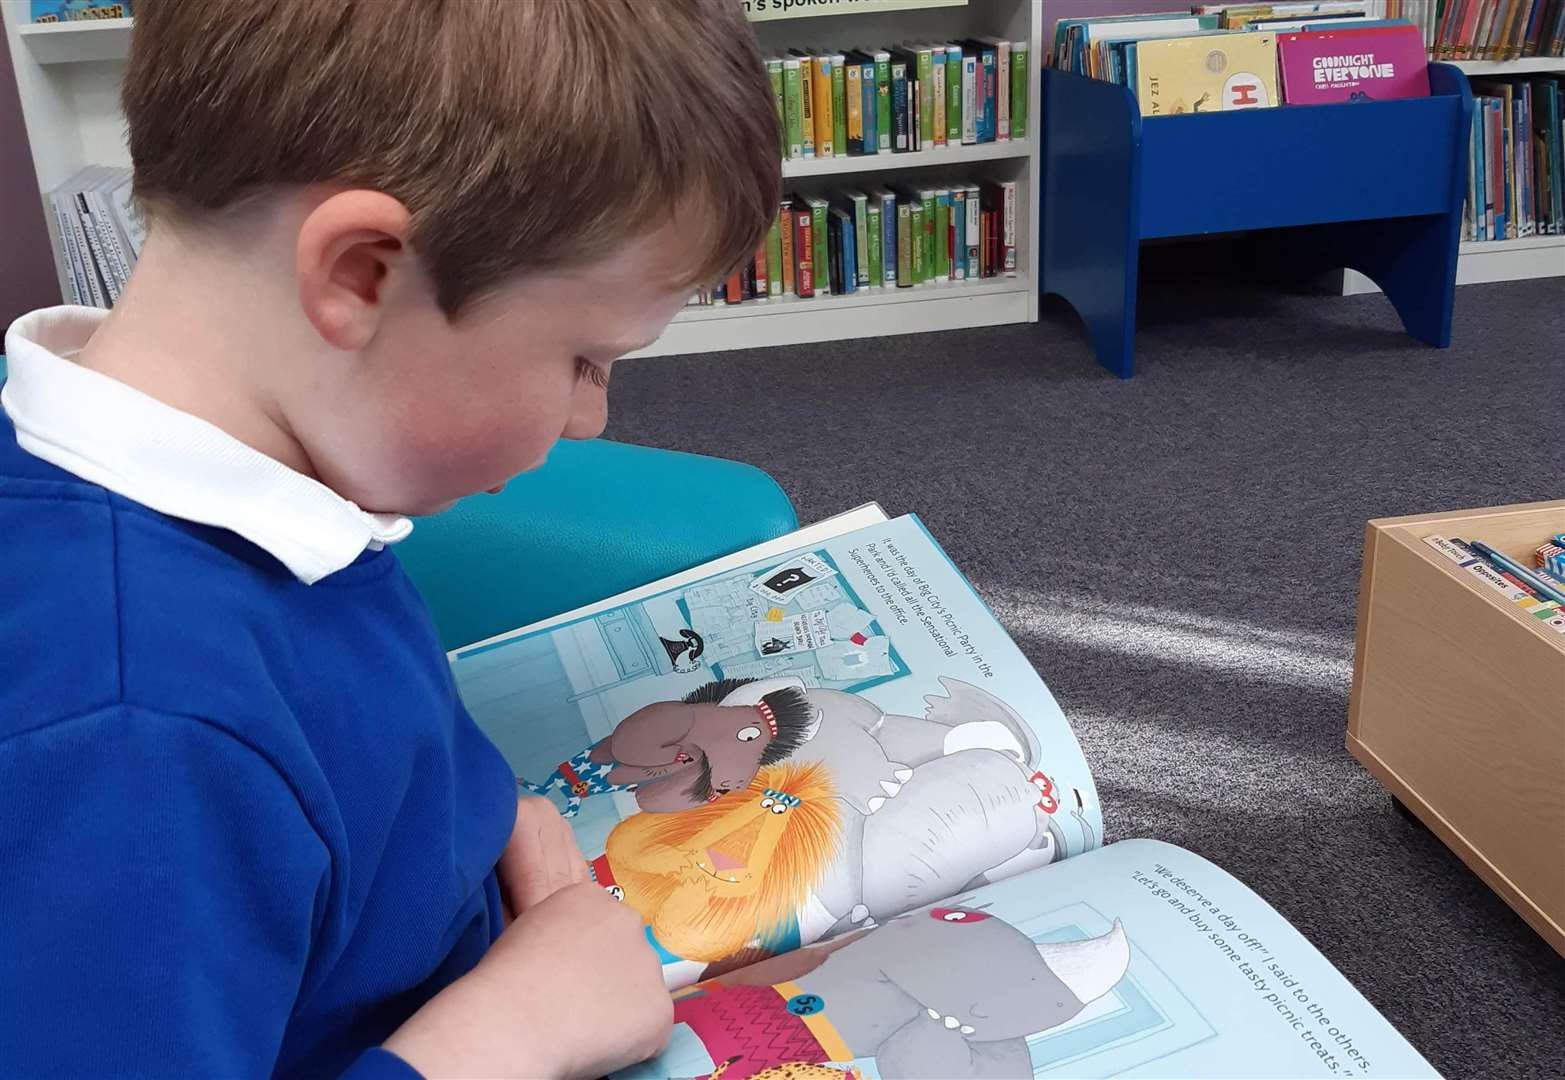 A visit to the library when they re-opened in April 2021 as lockdown restrictions eased